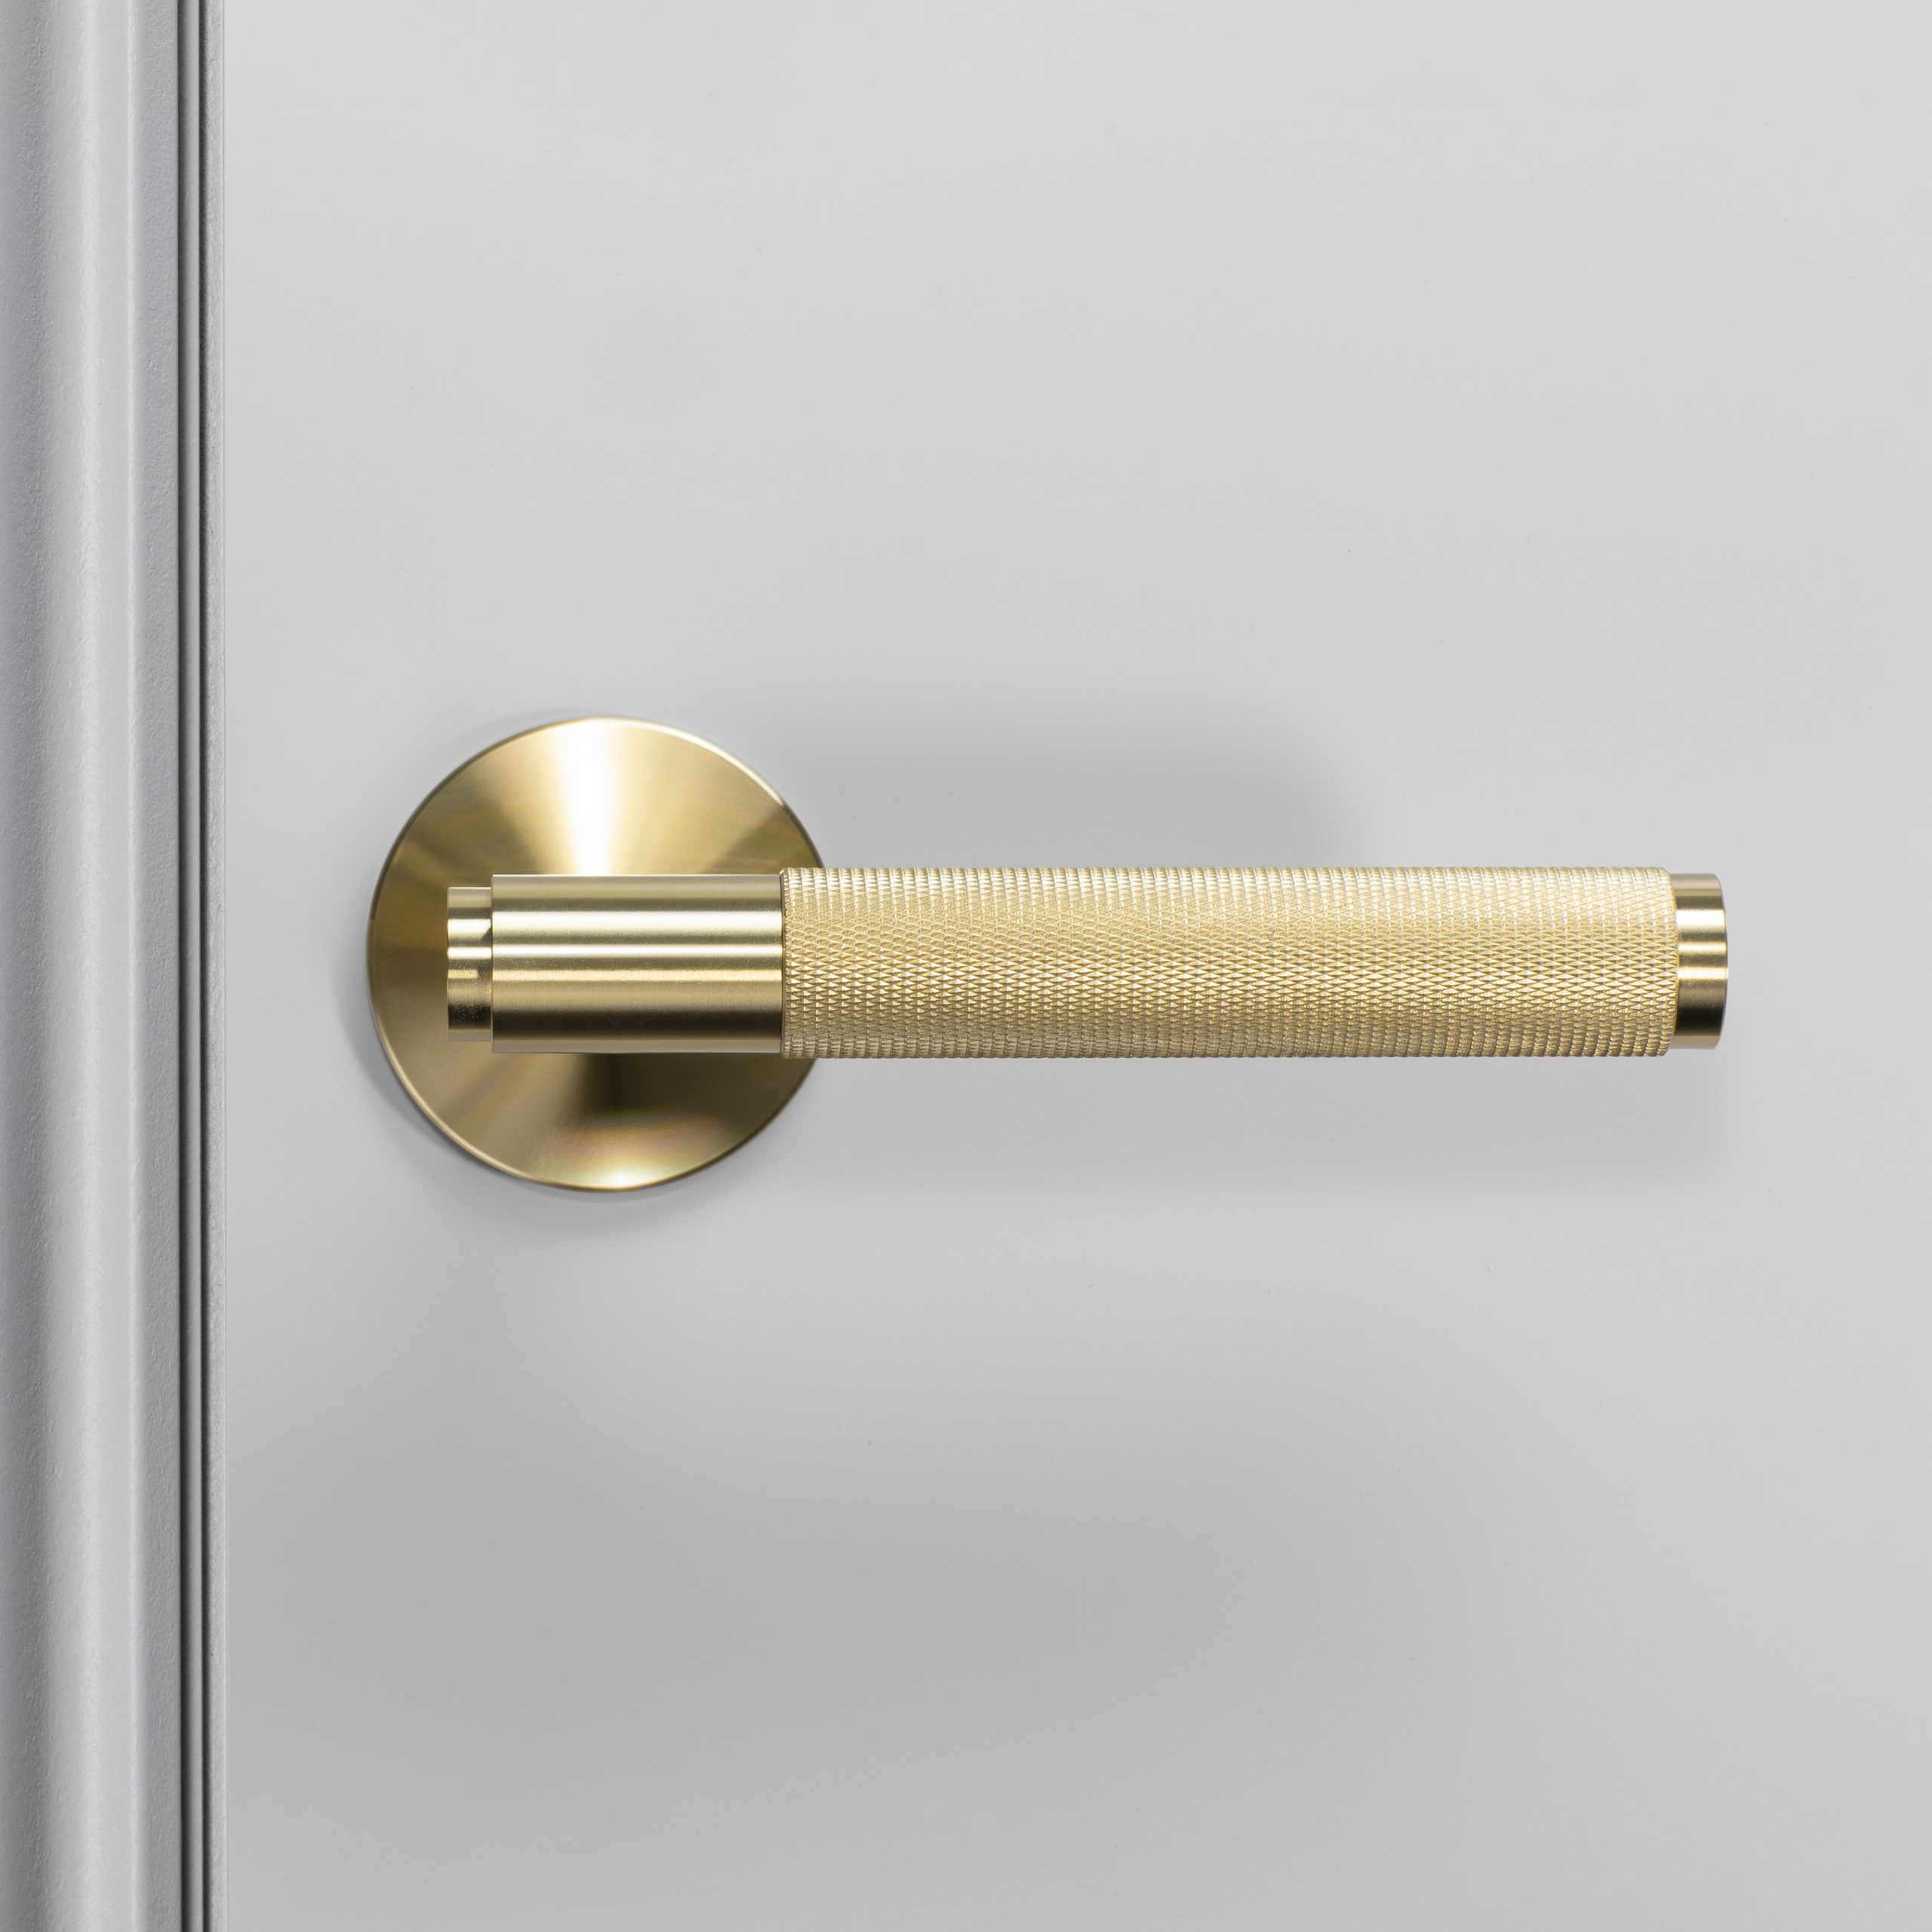  The Most Popular Door Handle Finishes In 2021